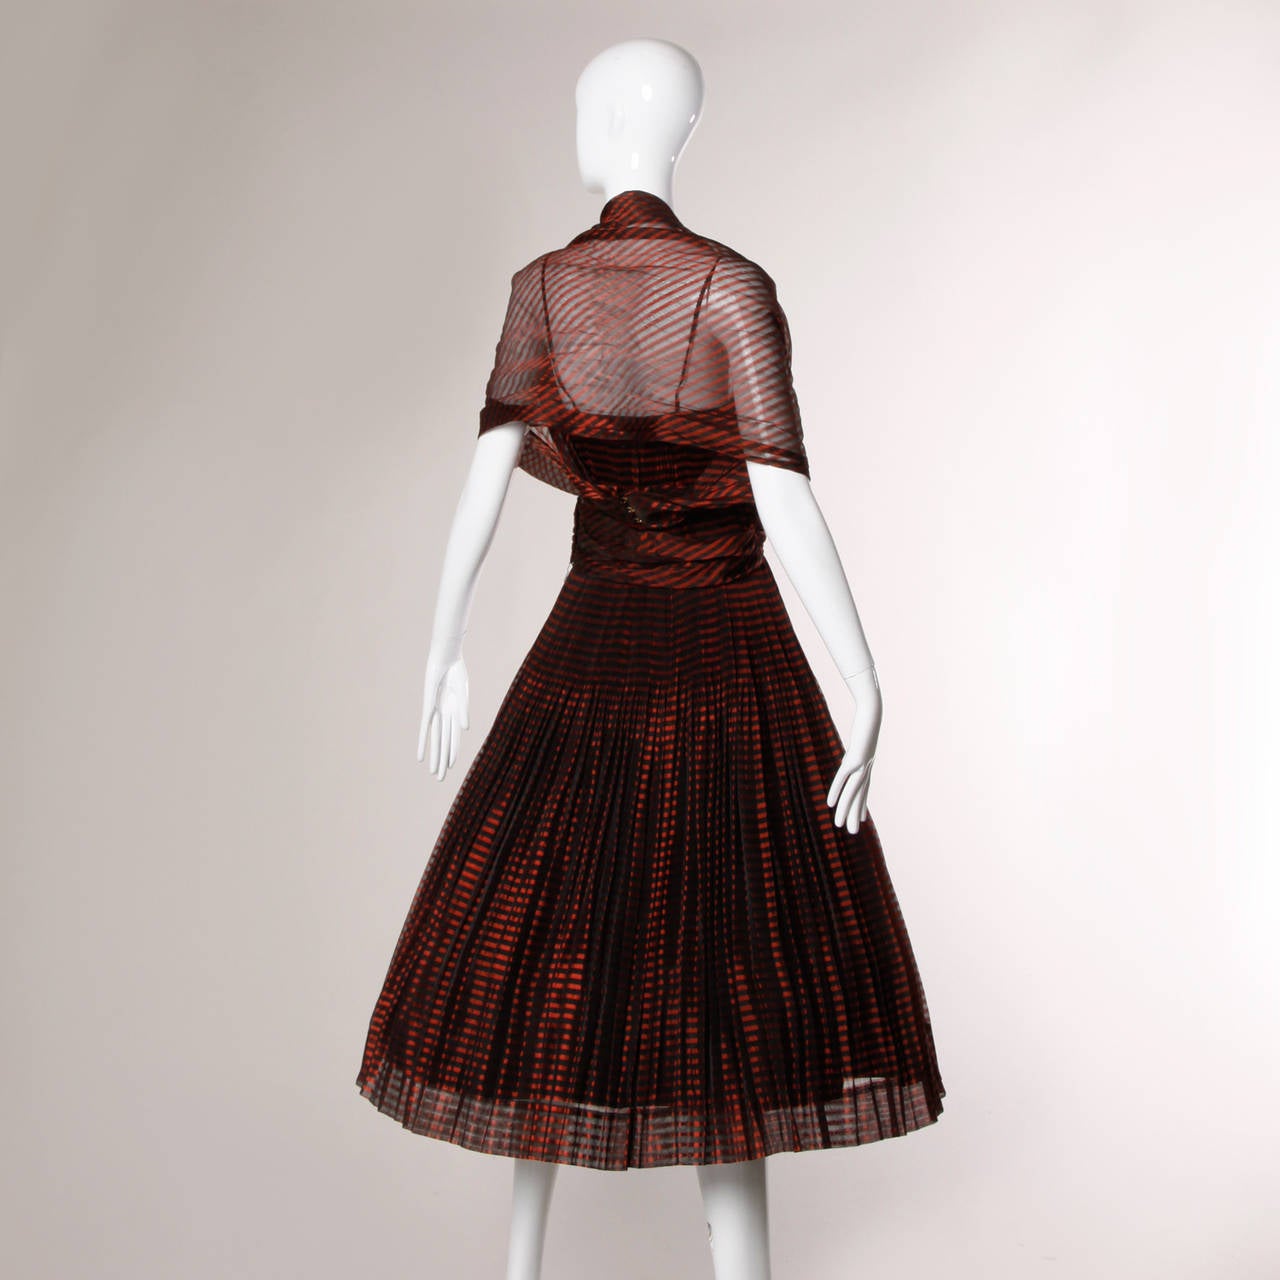 Women's Vintage 1940s Irridescent Crystal Pleated Red Stripe Dress + Wrap